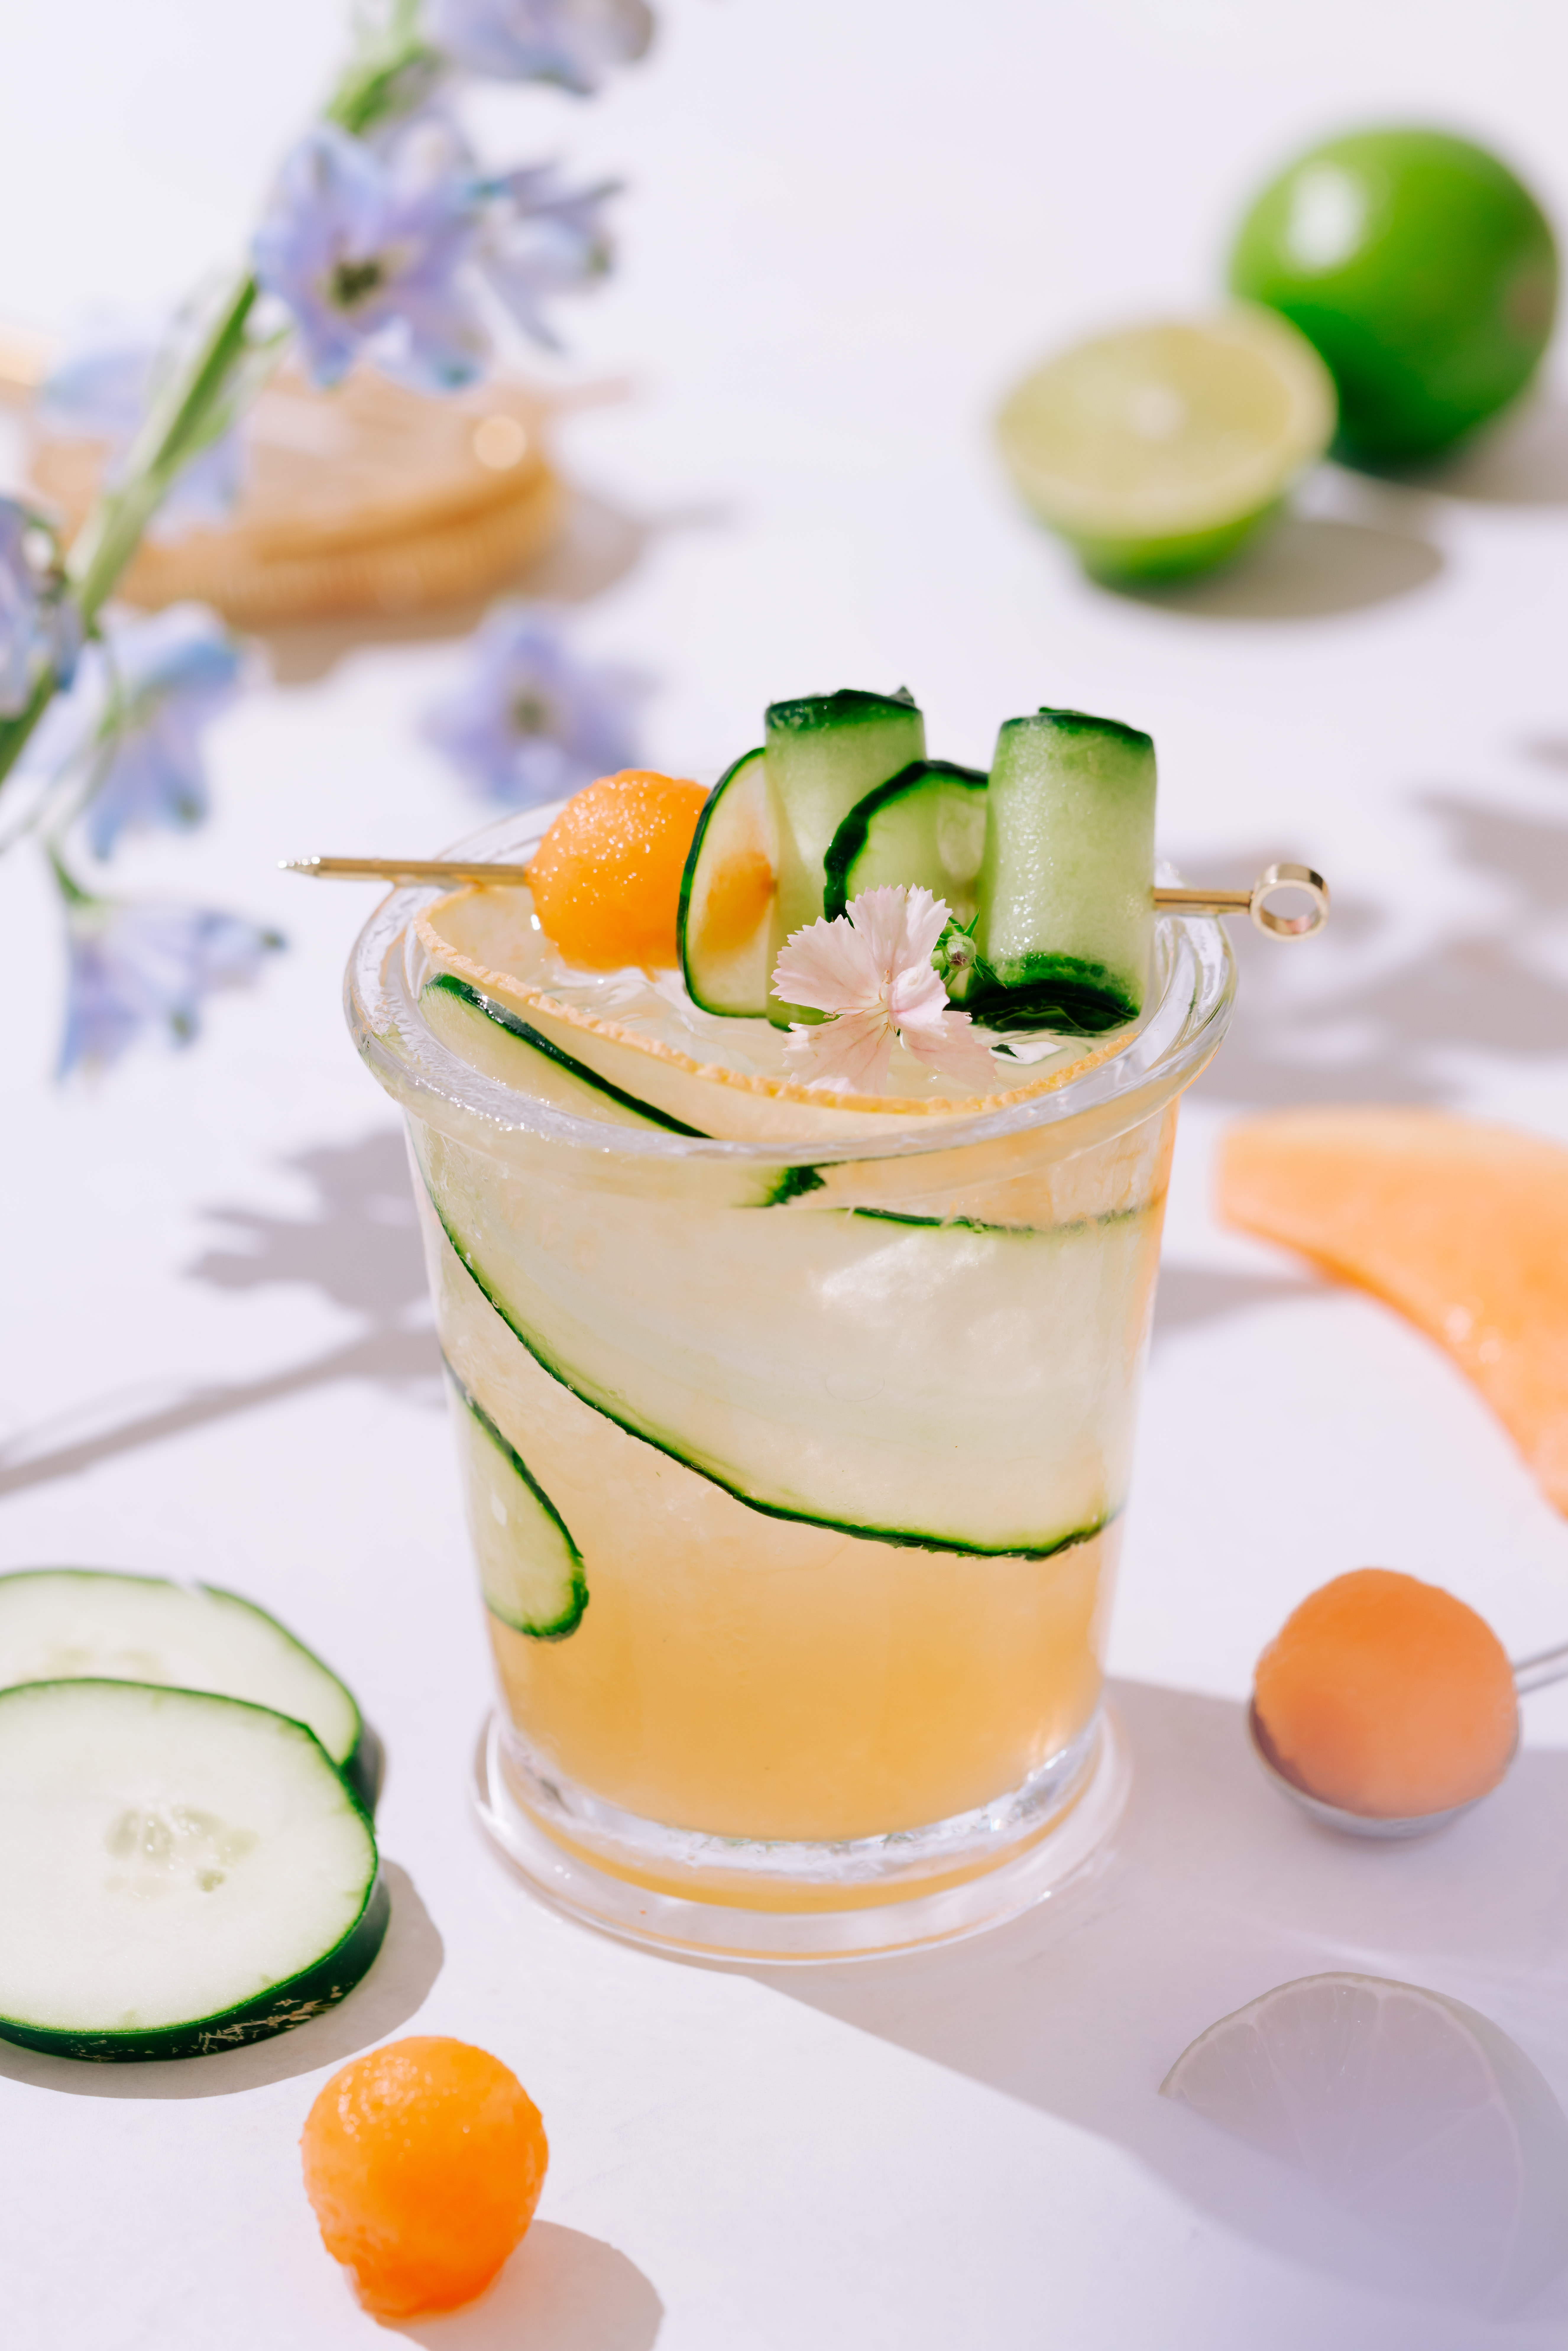 Sipping Summer: The Cucumber Melon Cocktail - The Social Sipper